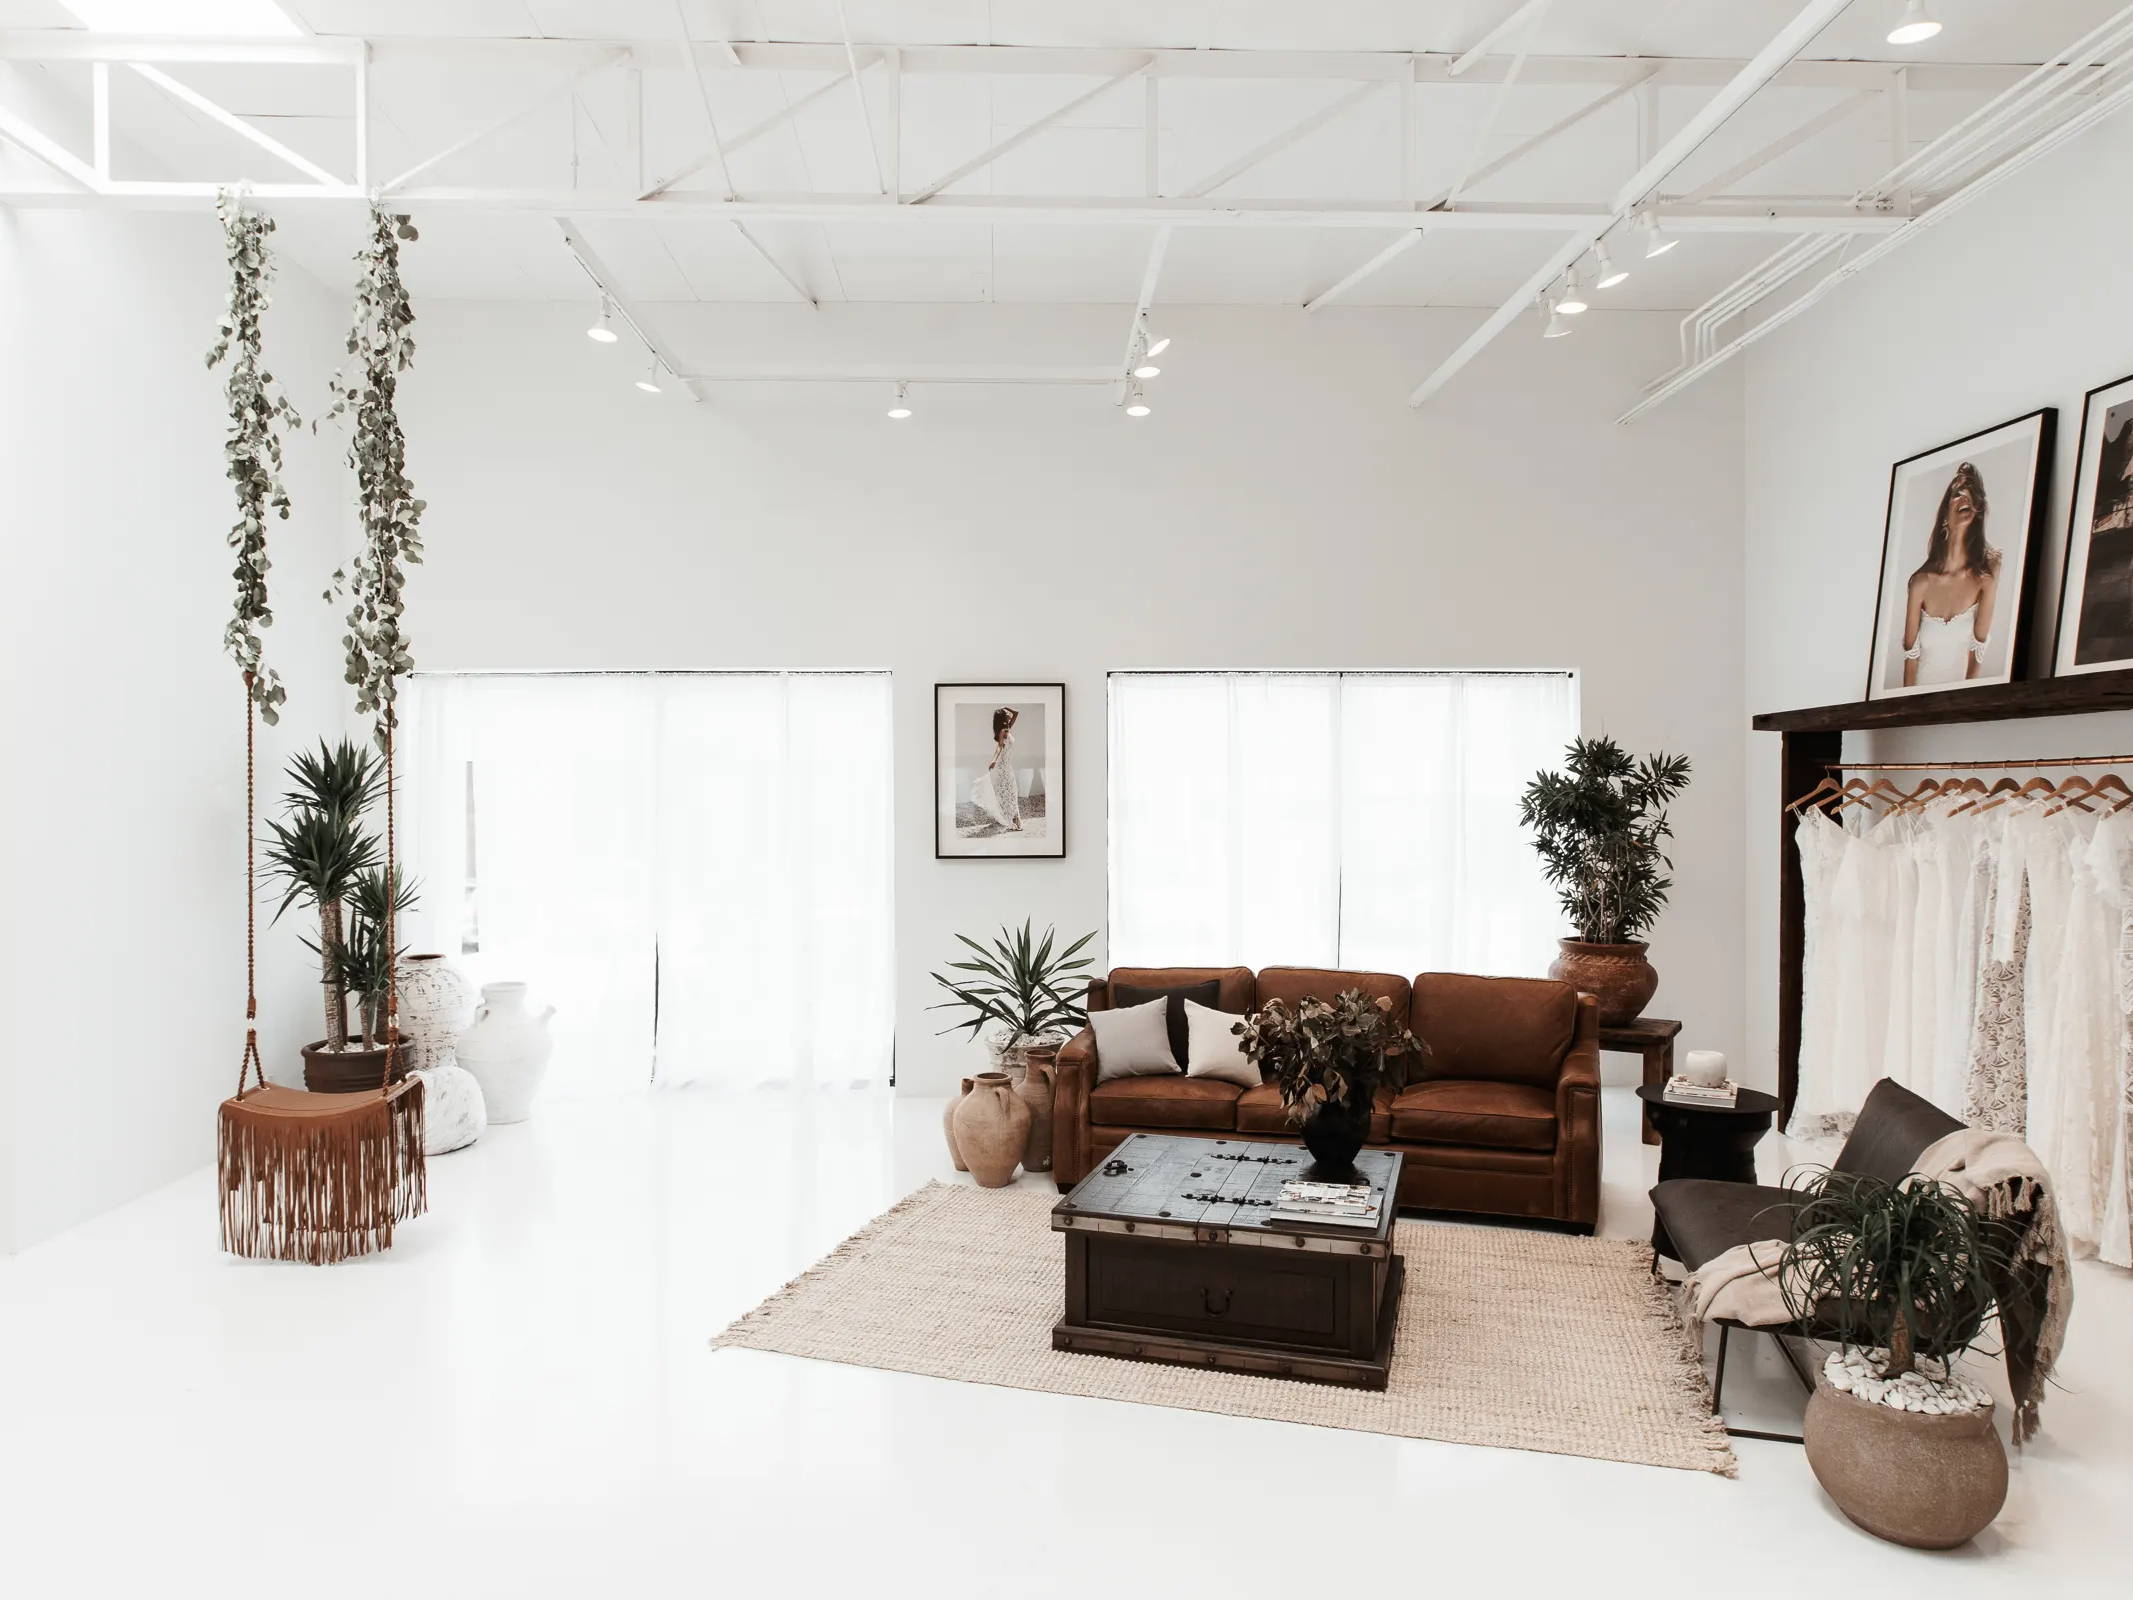 Inside the Grace Loves lace Dallas bridal showroom